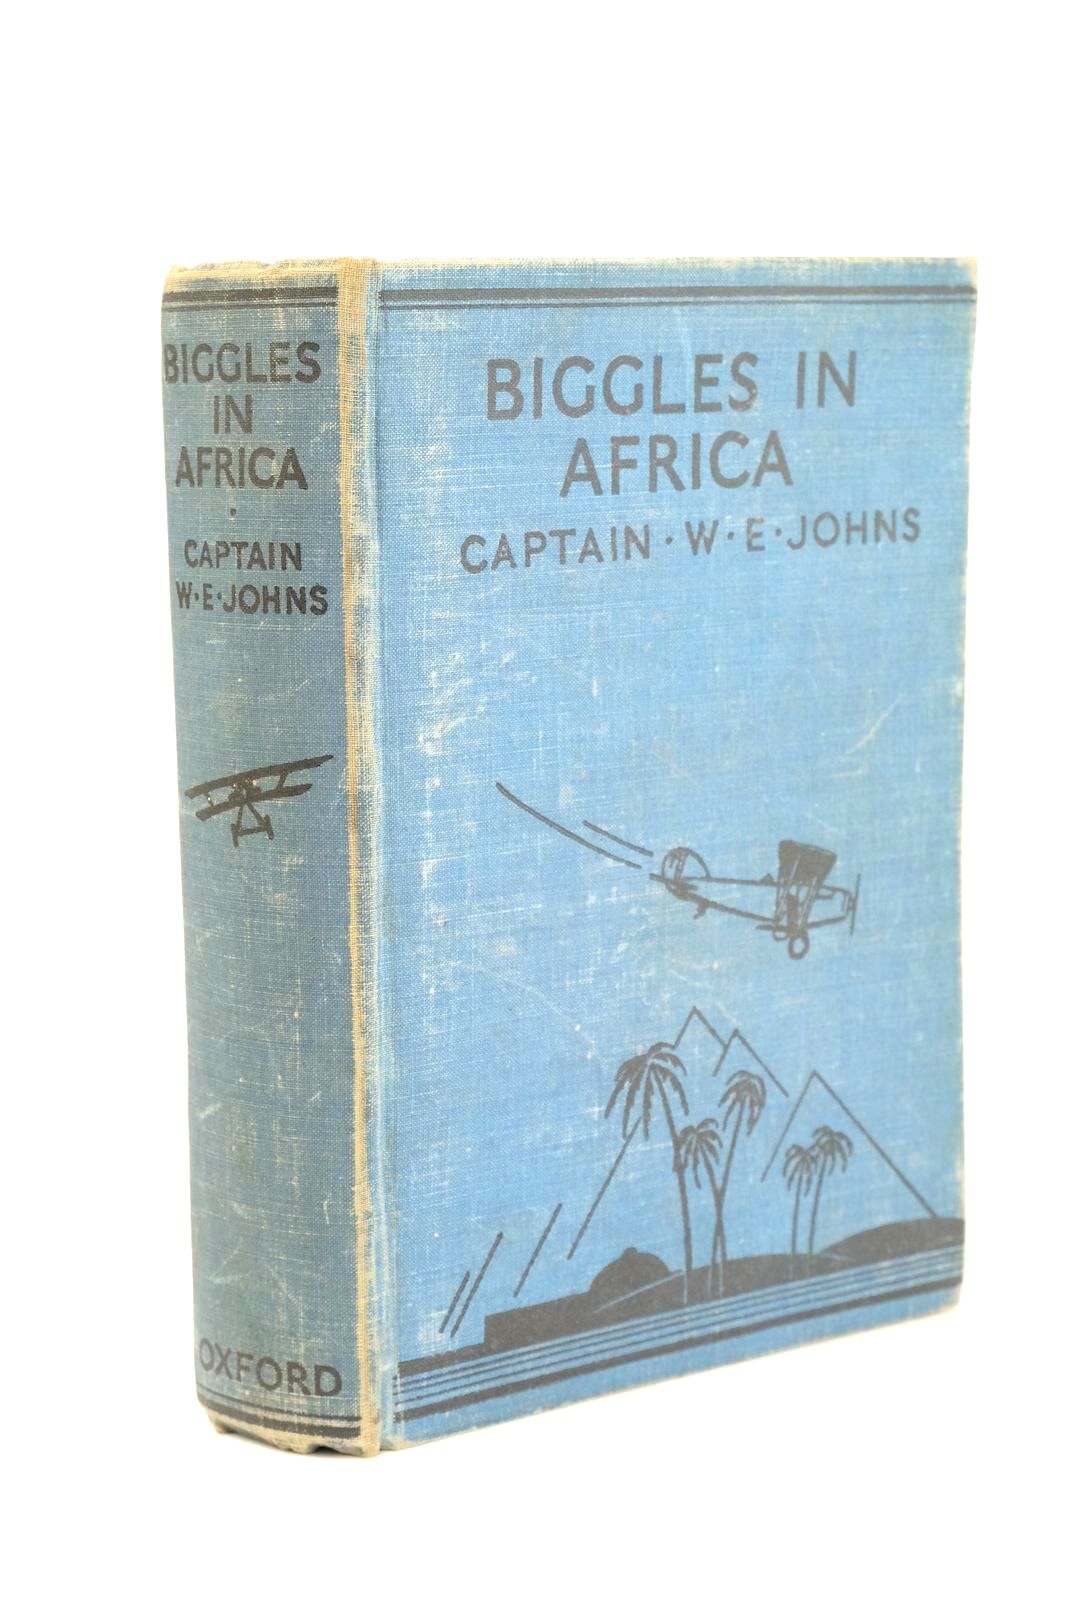 Photo of BIGGLES IN AFRICA written by Johns, W.E. illustrated by Leigh, Howard Sindall, Alfred published by Oxford University Press, Humphrey Milford (STOCK CODE: 1324981)  for sale by Stella & Rose's Books